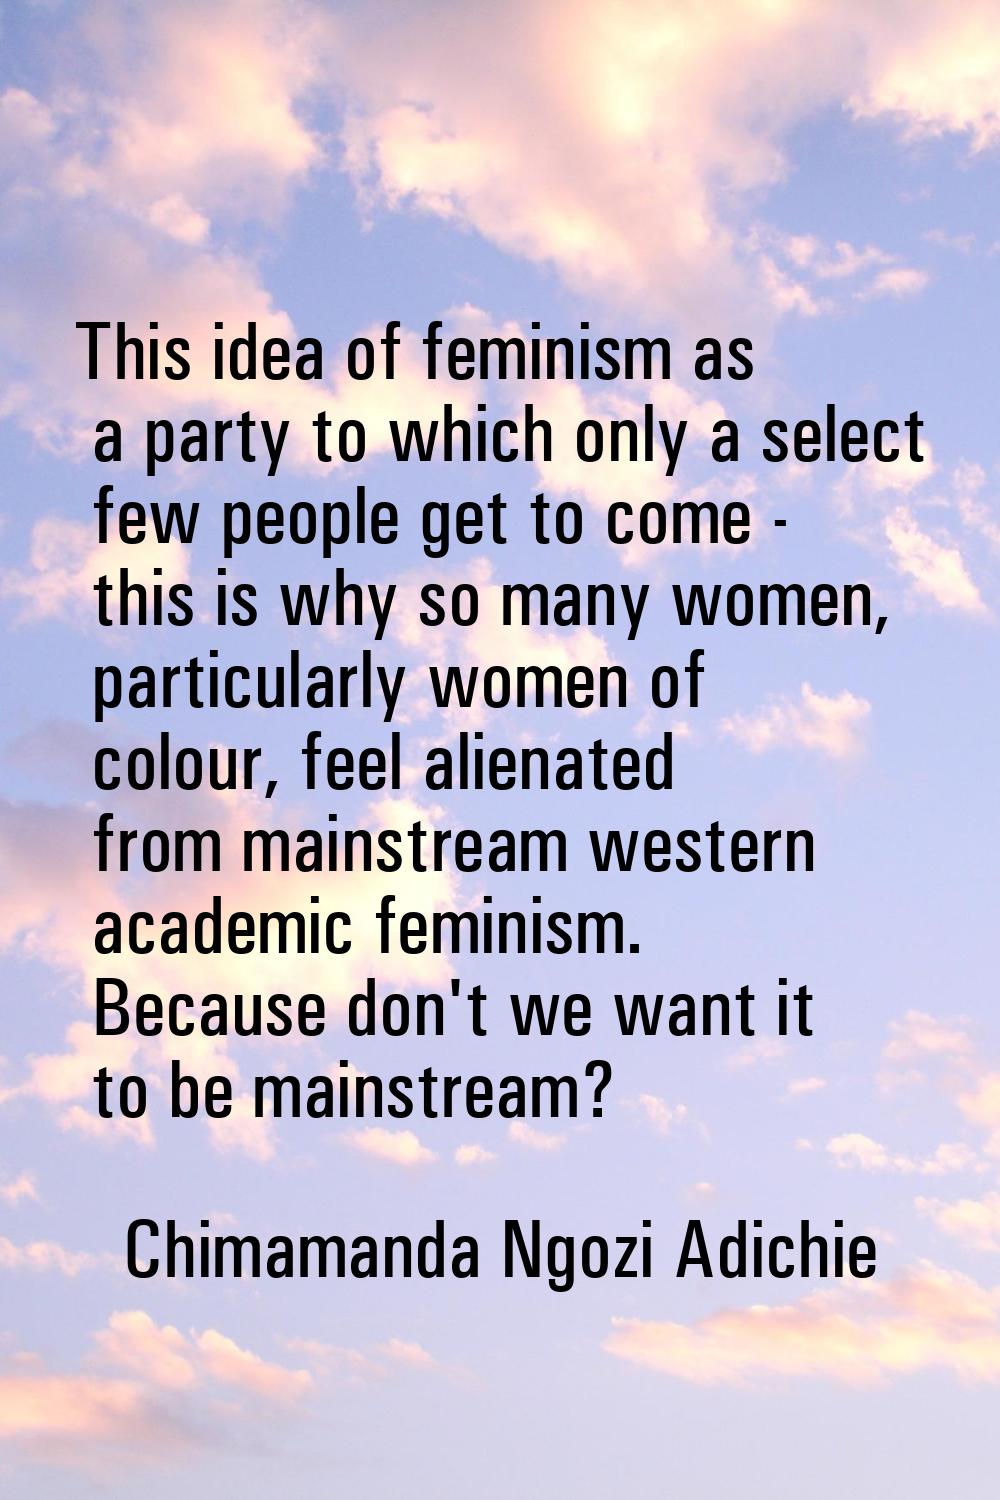 This idea of feminism as a party to which only a select few people get to come - this is why so man